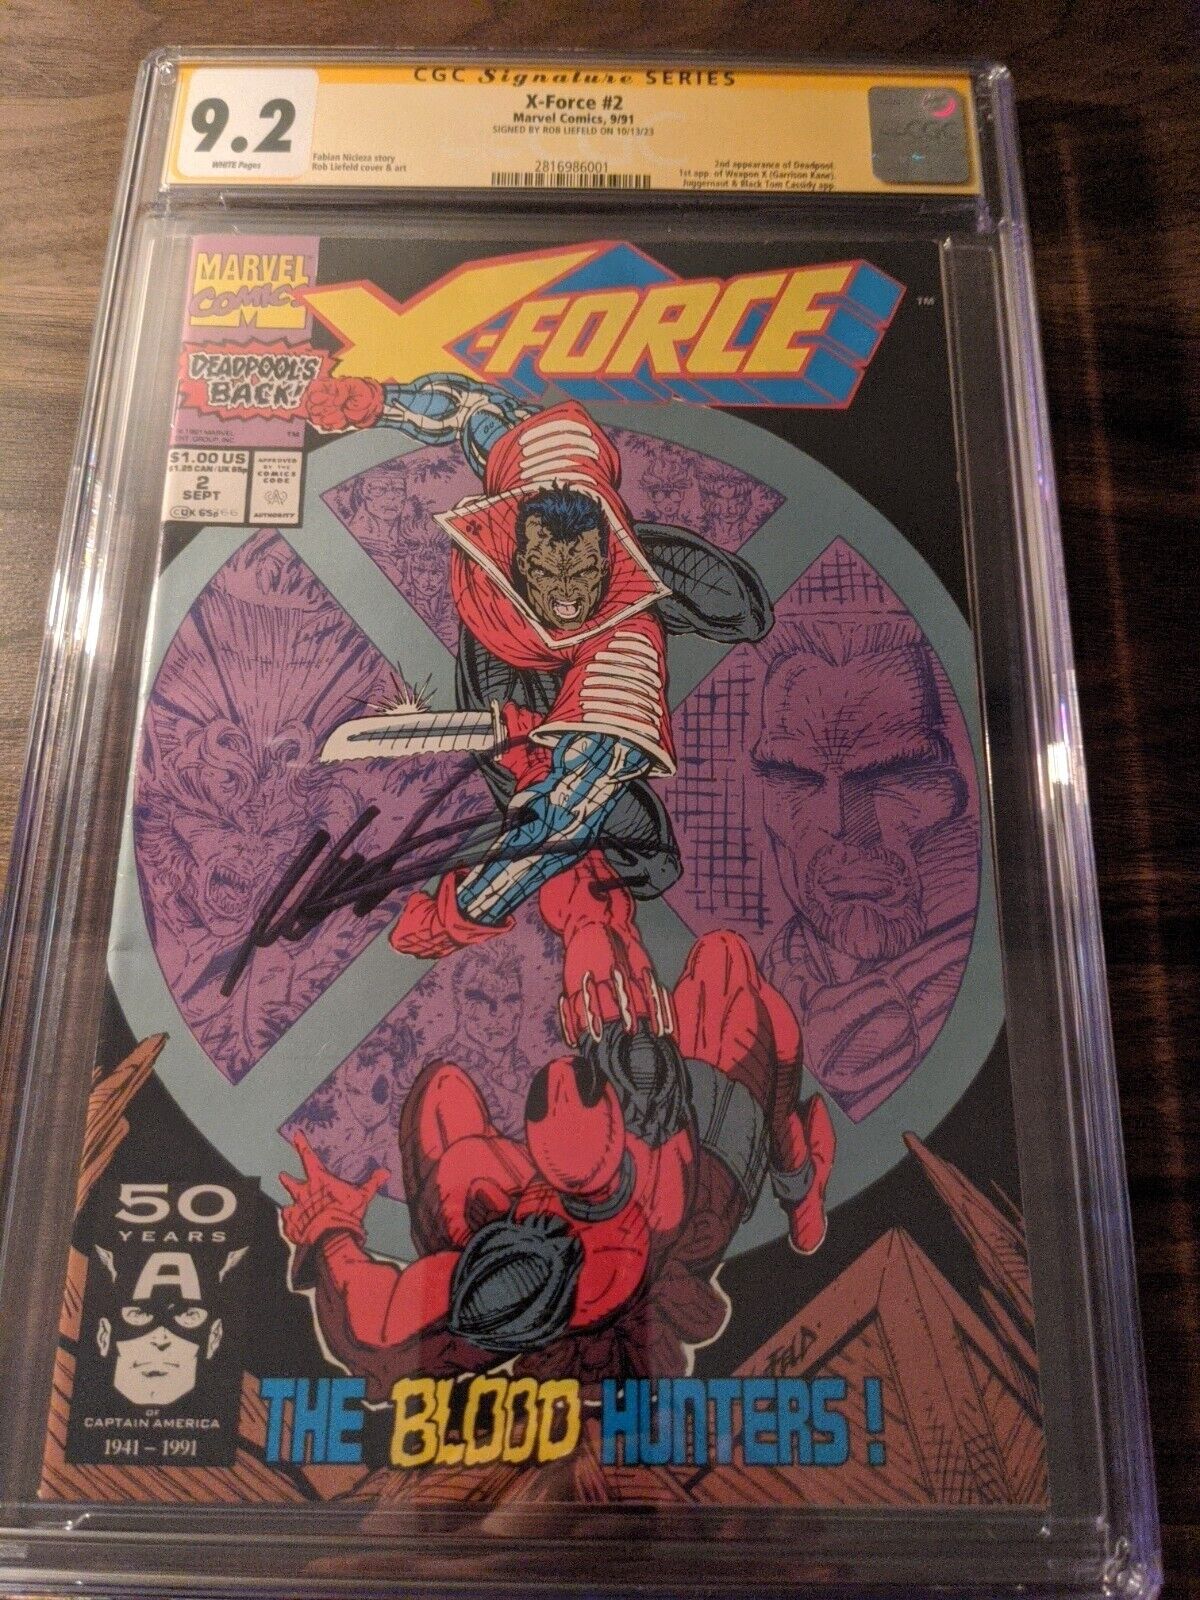  X-Force #2 CGC 9.2  WP 2nd  Deadpool  1st App Weapon X Signed Rob Liefeld🔥